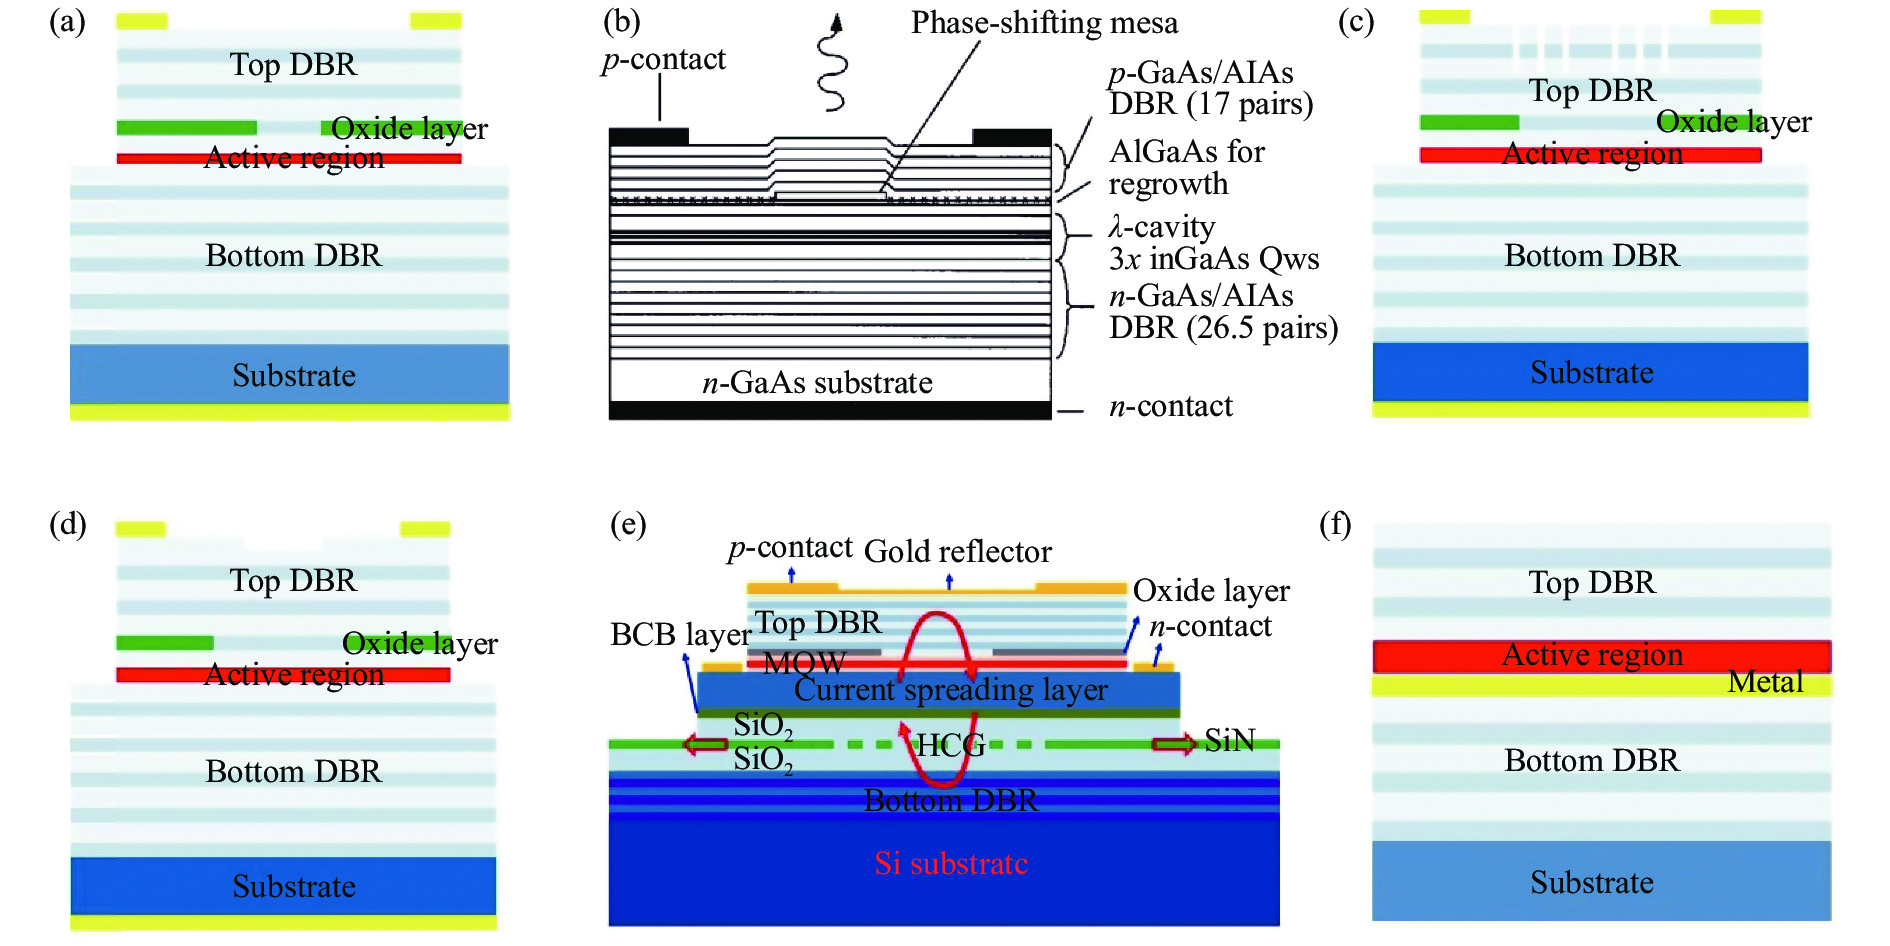 (a) VCSEL with a oxide aperture[13]; (b) Introducing phase shift mesa and selective Fermi level pinning interface in the laser cavity of VCSEL[20]; (c) Upper DBR of VCSEL introduces single defect photonic crystal microstructure[22-25]; (d) An anti-phase layer is introduced on the upper DBR surface of VCSEL[28-30]; (e) Vertical cavity with a diffraction grating[35]; (f) Vertical cavity with a metal layer[36-38]